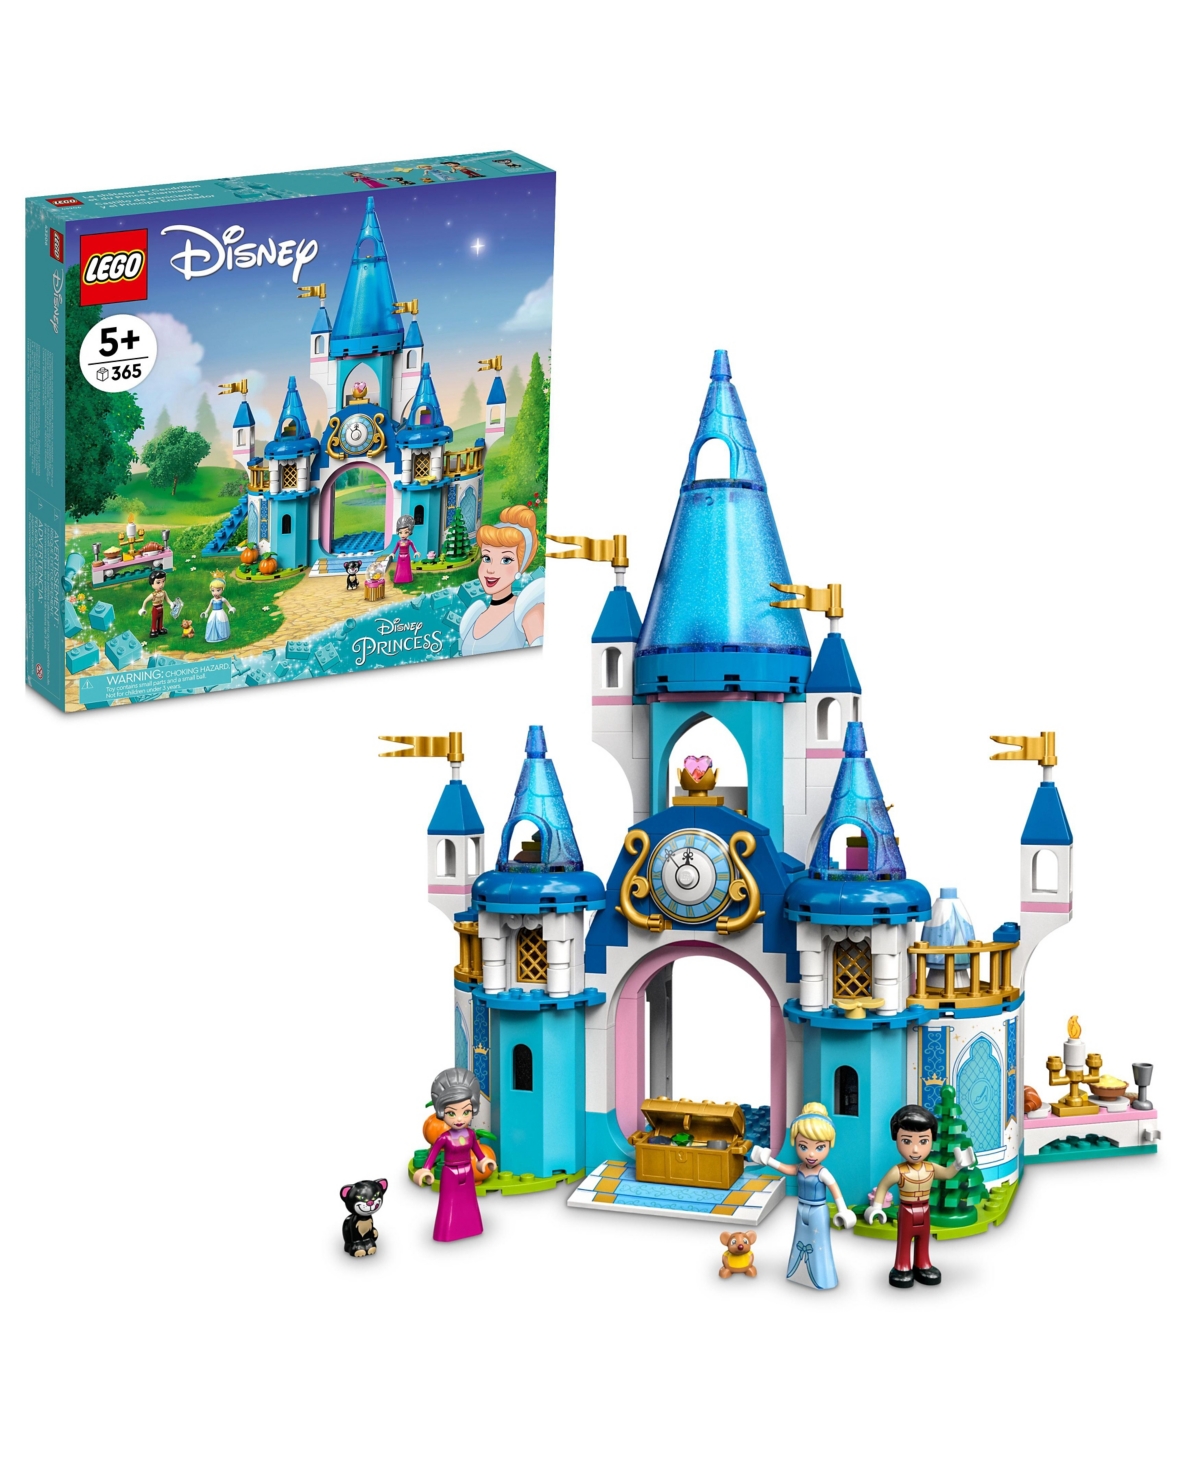 Lego Disney 43206 Cinderella And Prince Charming Castle Toy Building Set With Minifigures In Multicolor